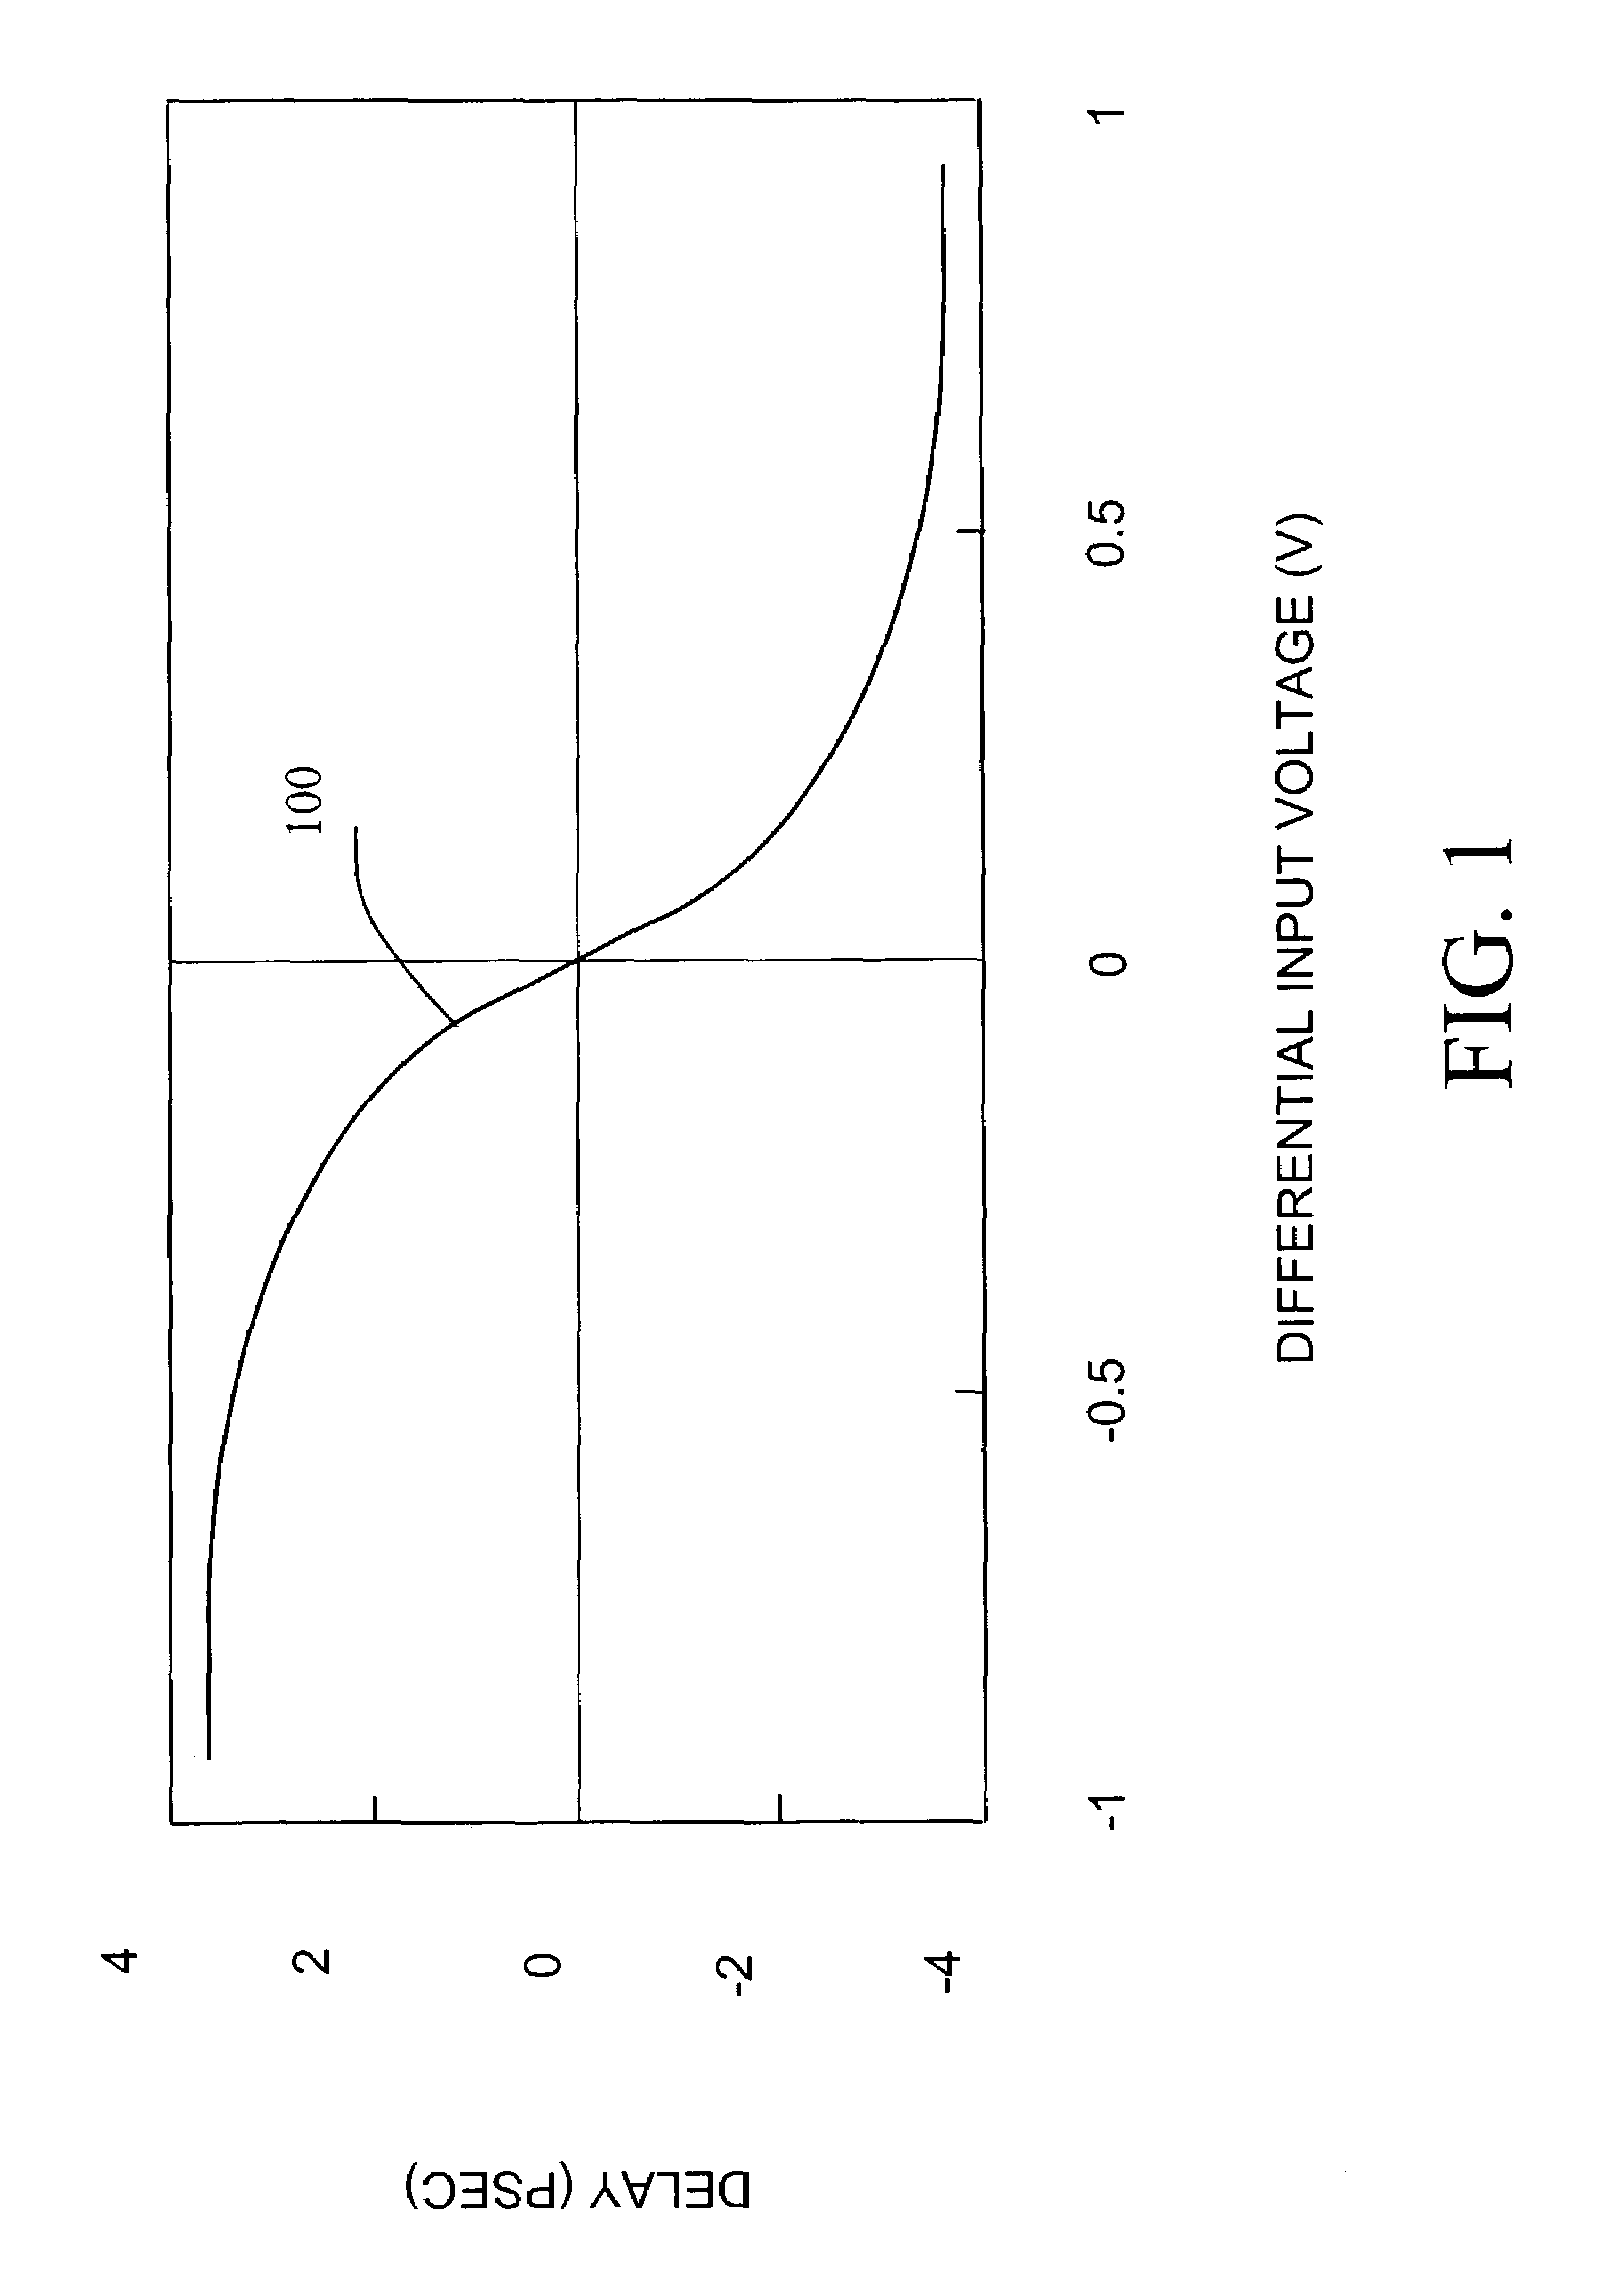 Time delay apparatus and method of using same